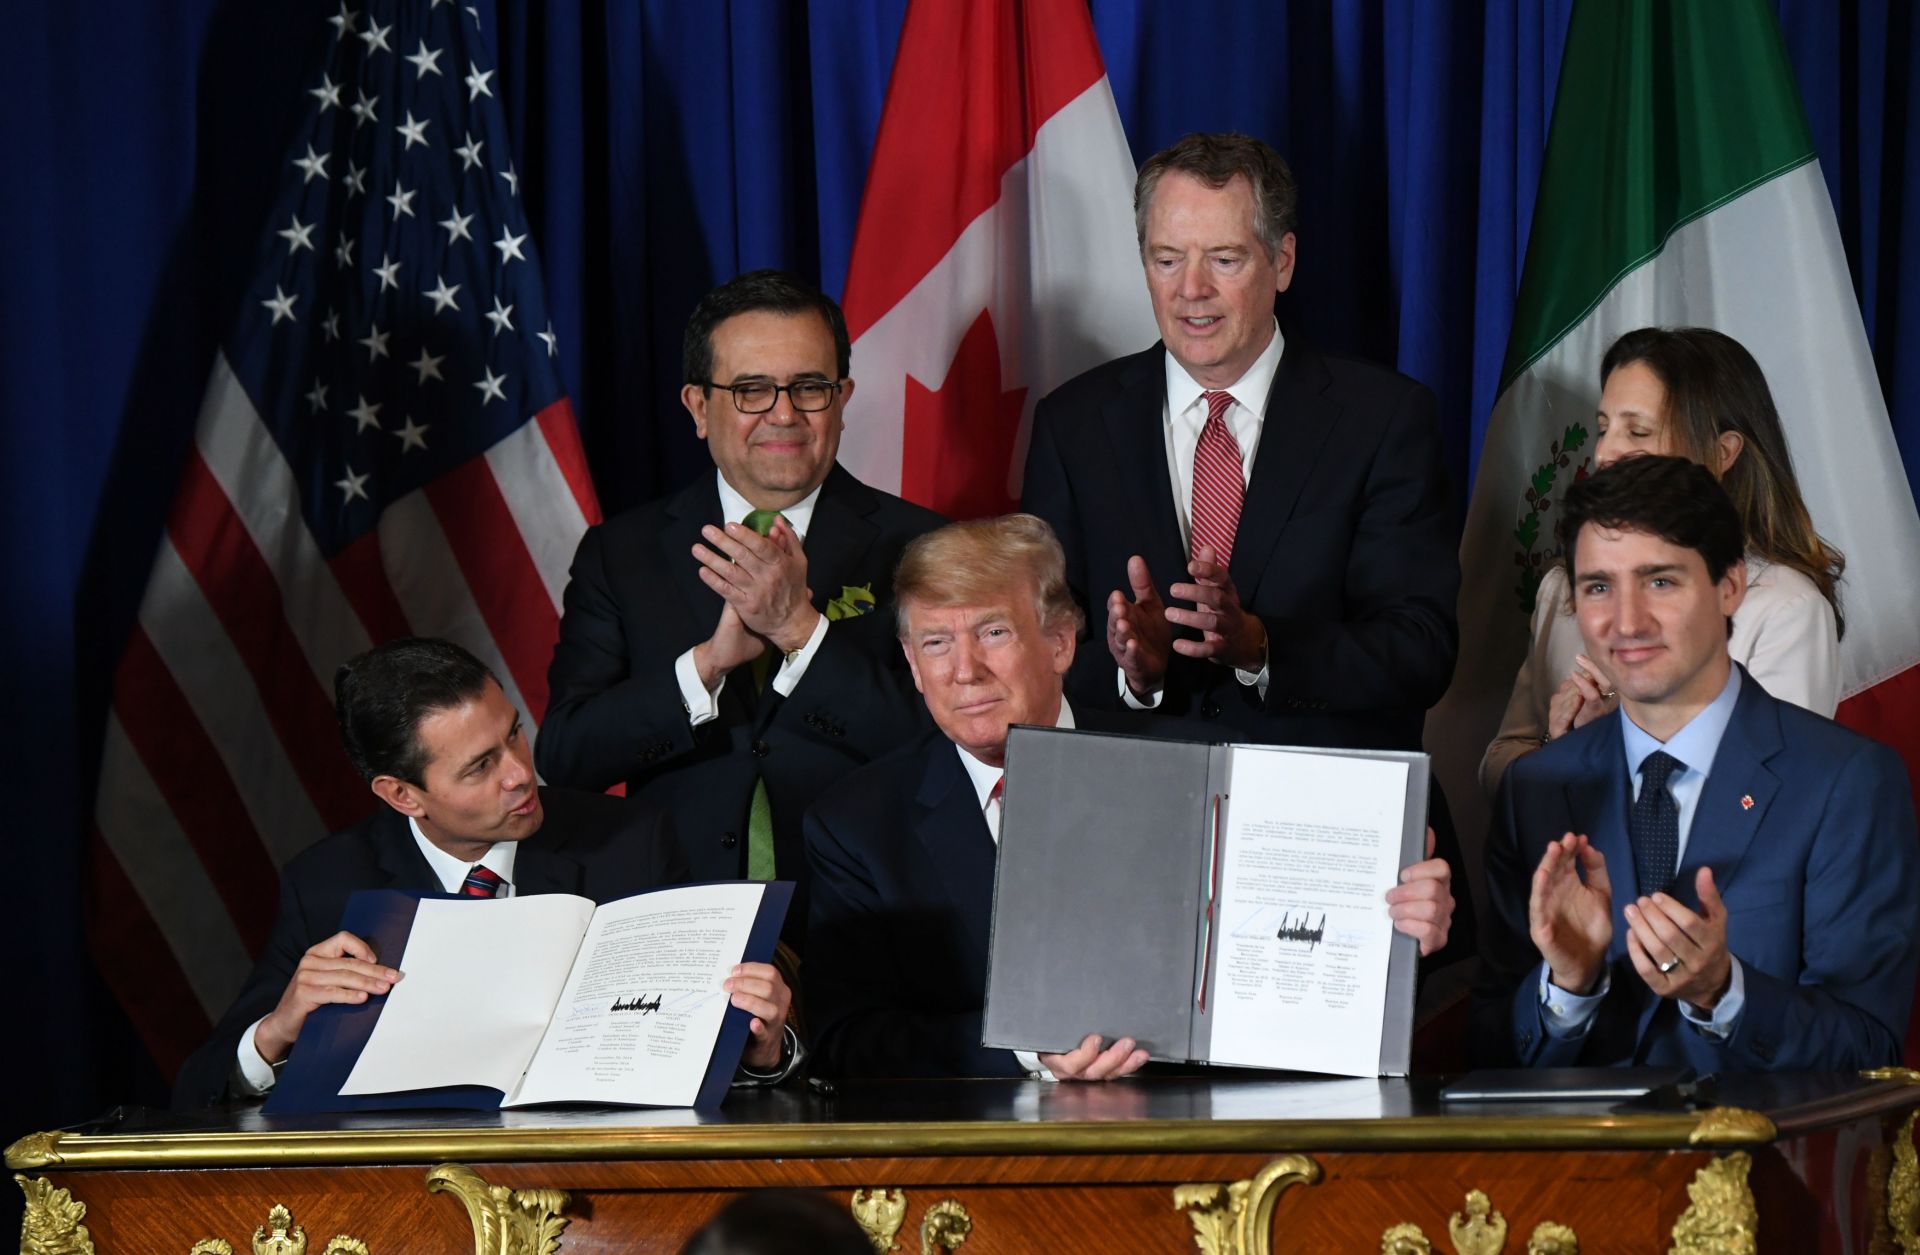 Mexican President Enrique Pena Nieto (left), U.S. President Donald Trump (center) and Canadian Prime Minister Justin Trudeau sit together after signing a new free trade agreement in Buenos Aires, Argentina, on Nov. 30.